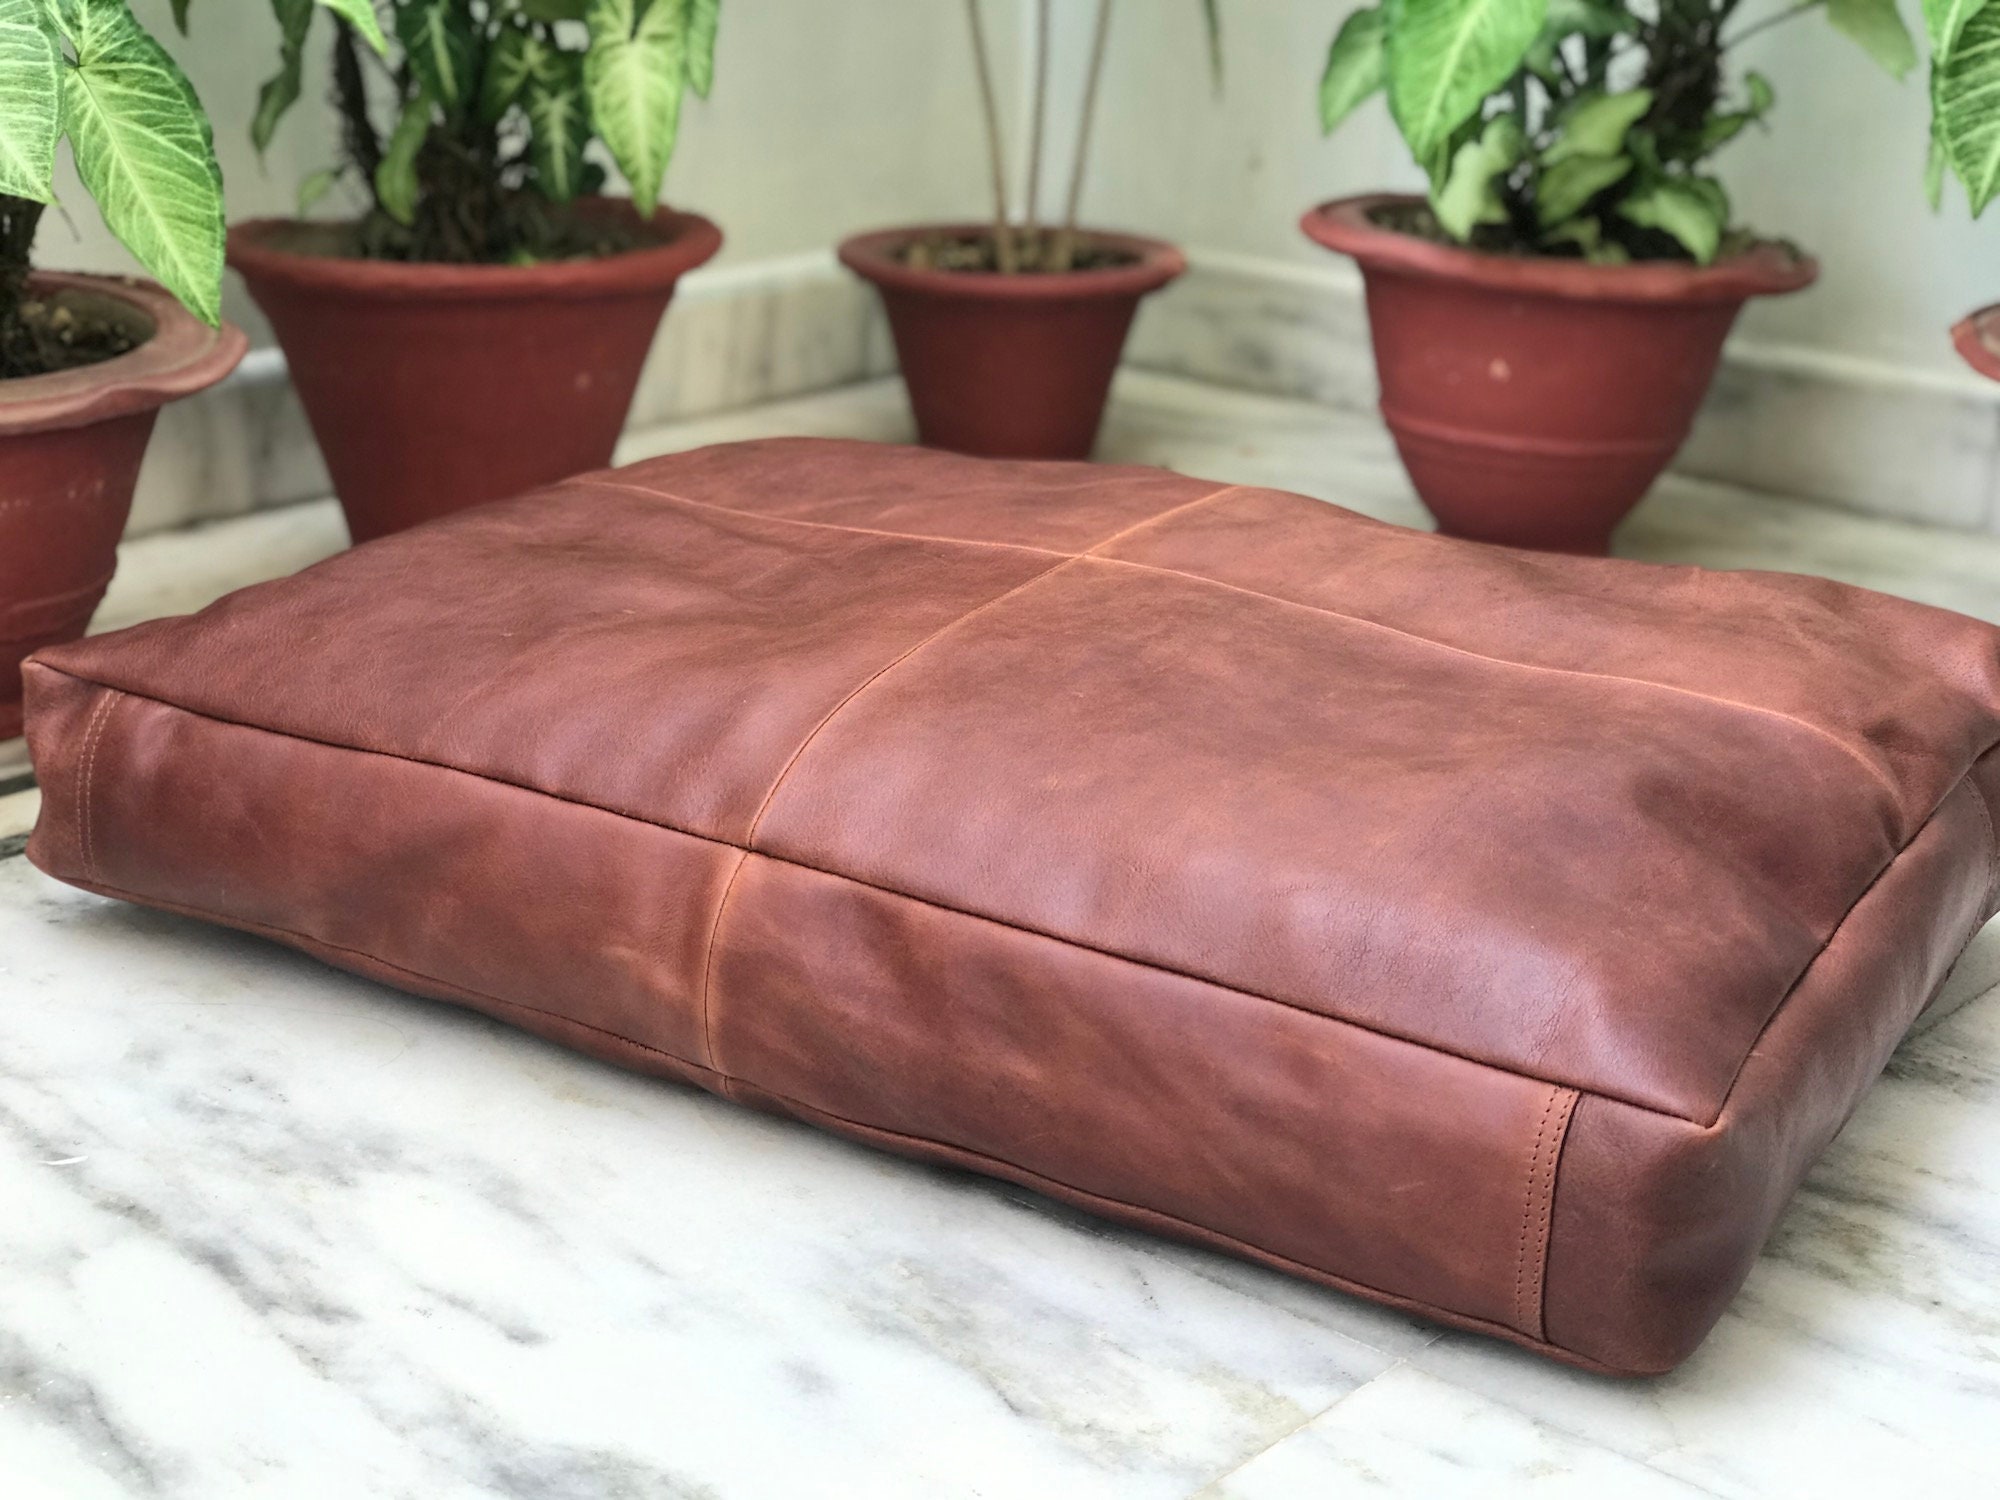 Smelten Bedoel concert Customized Genuine Leather Seat Cushion Cover Personalized - Etsy